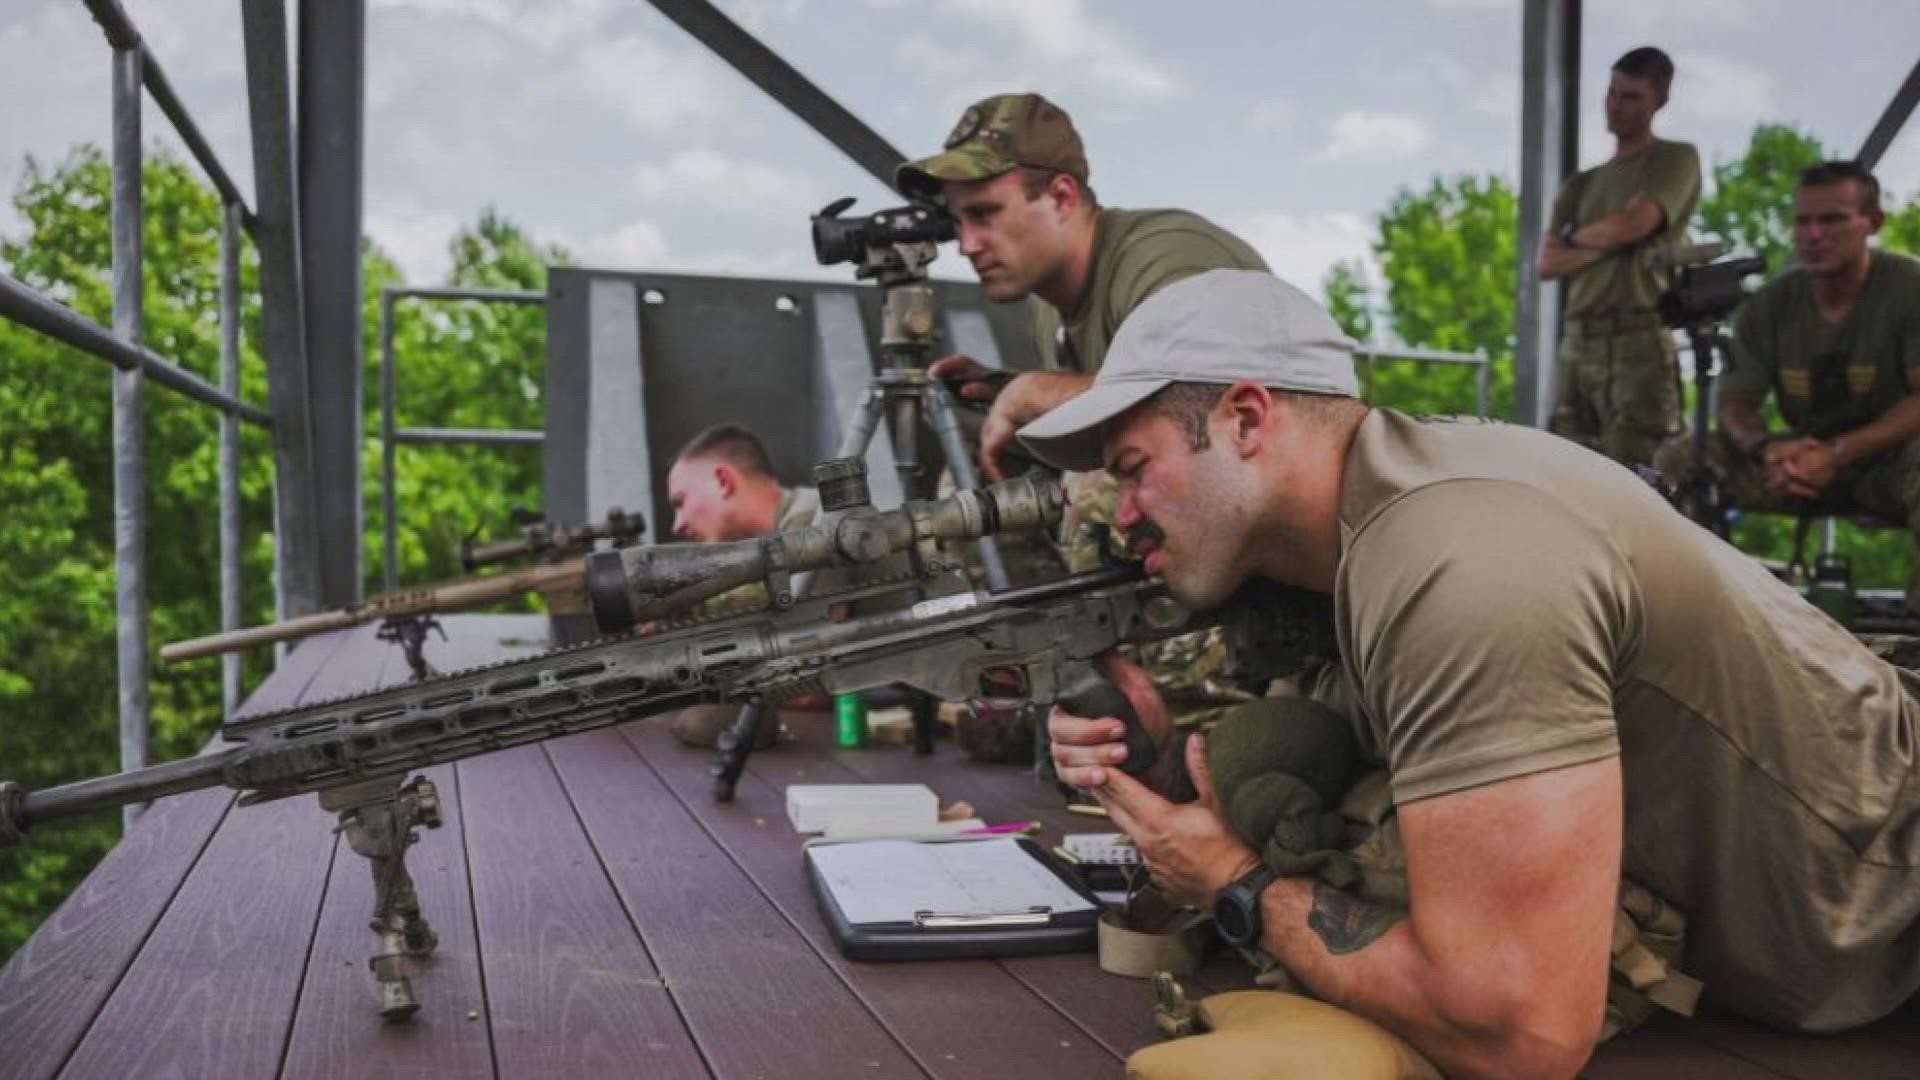 Staff Sgt. Cameron Bahi is a trained sniper who sharpens his skills on the weekends, but then works as a nurse in the adult neurological intensive care unit.